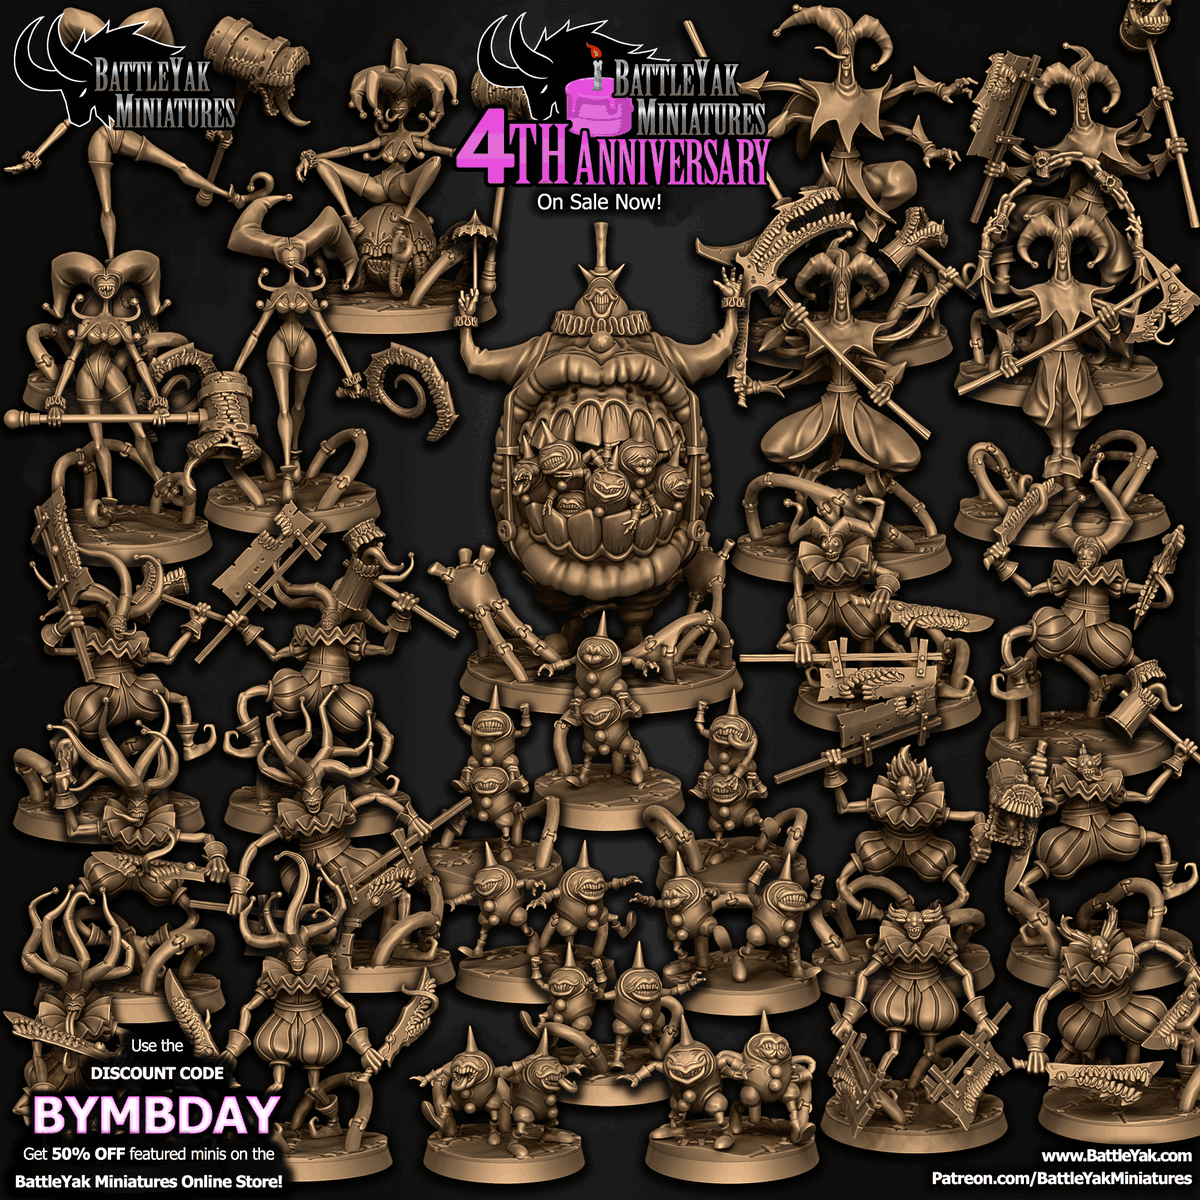 Battle Yak Miniatures turned 4 years old this March! Celebrate on the online store with the code BYMBDAY! battleyak.com #3dprinting #tabletopgaming #3Dsculpting #dnd #pathfinder #wargaming #ttrpg #eldritch #clowns #miniatures